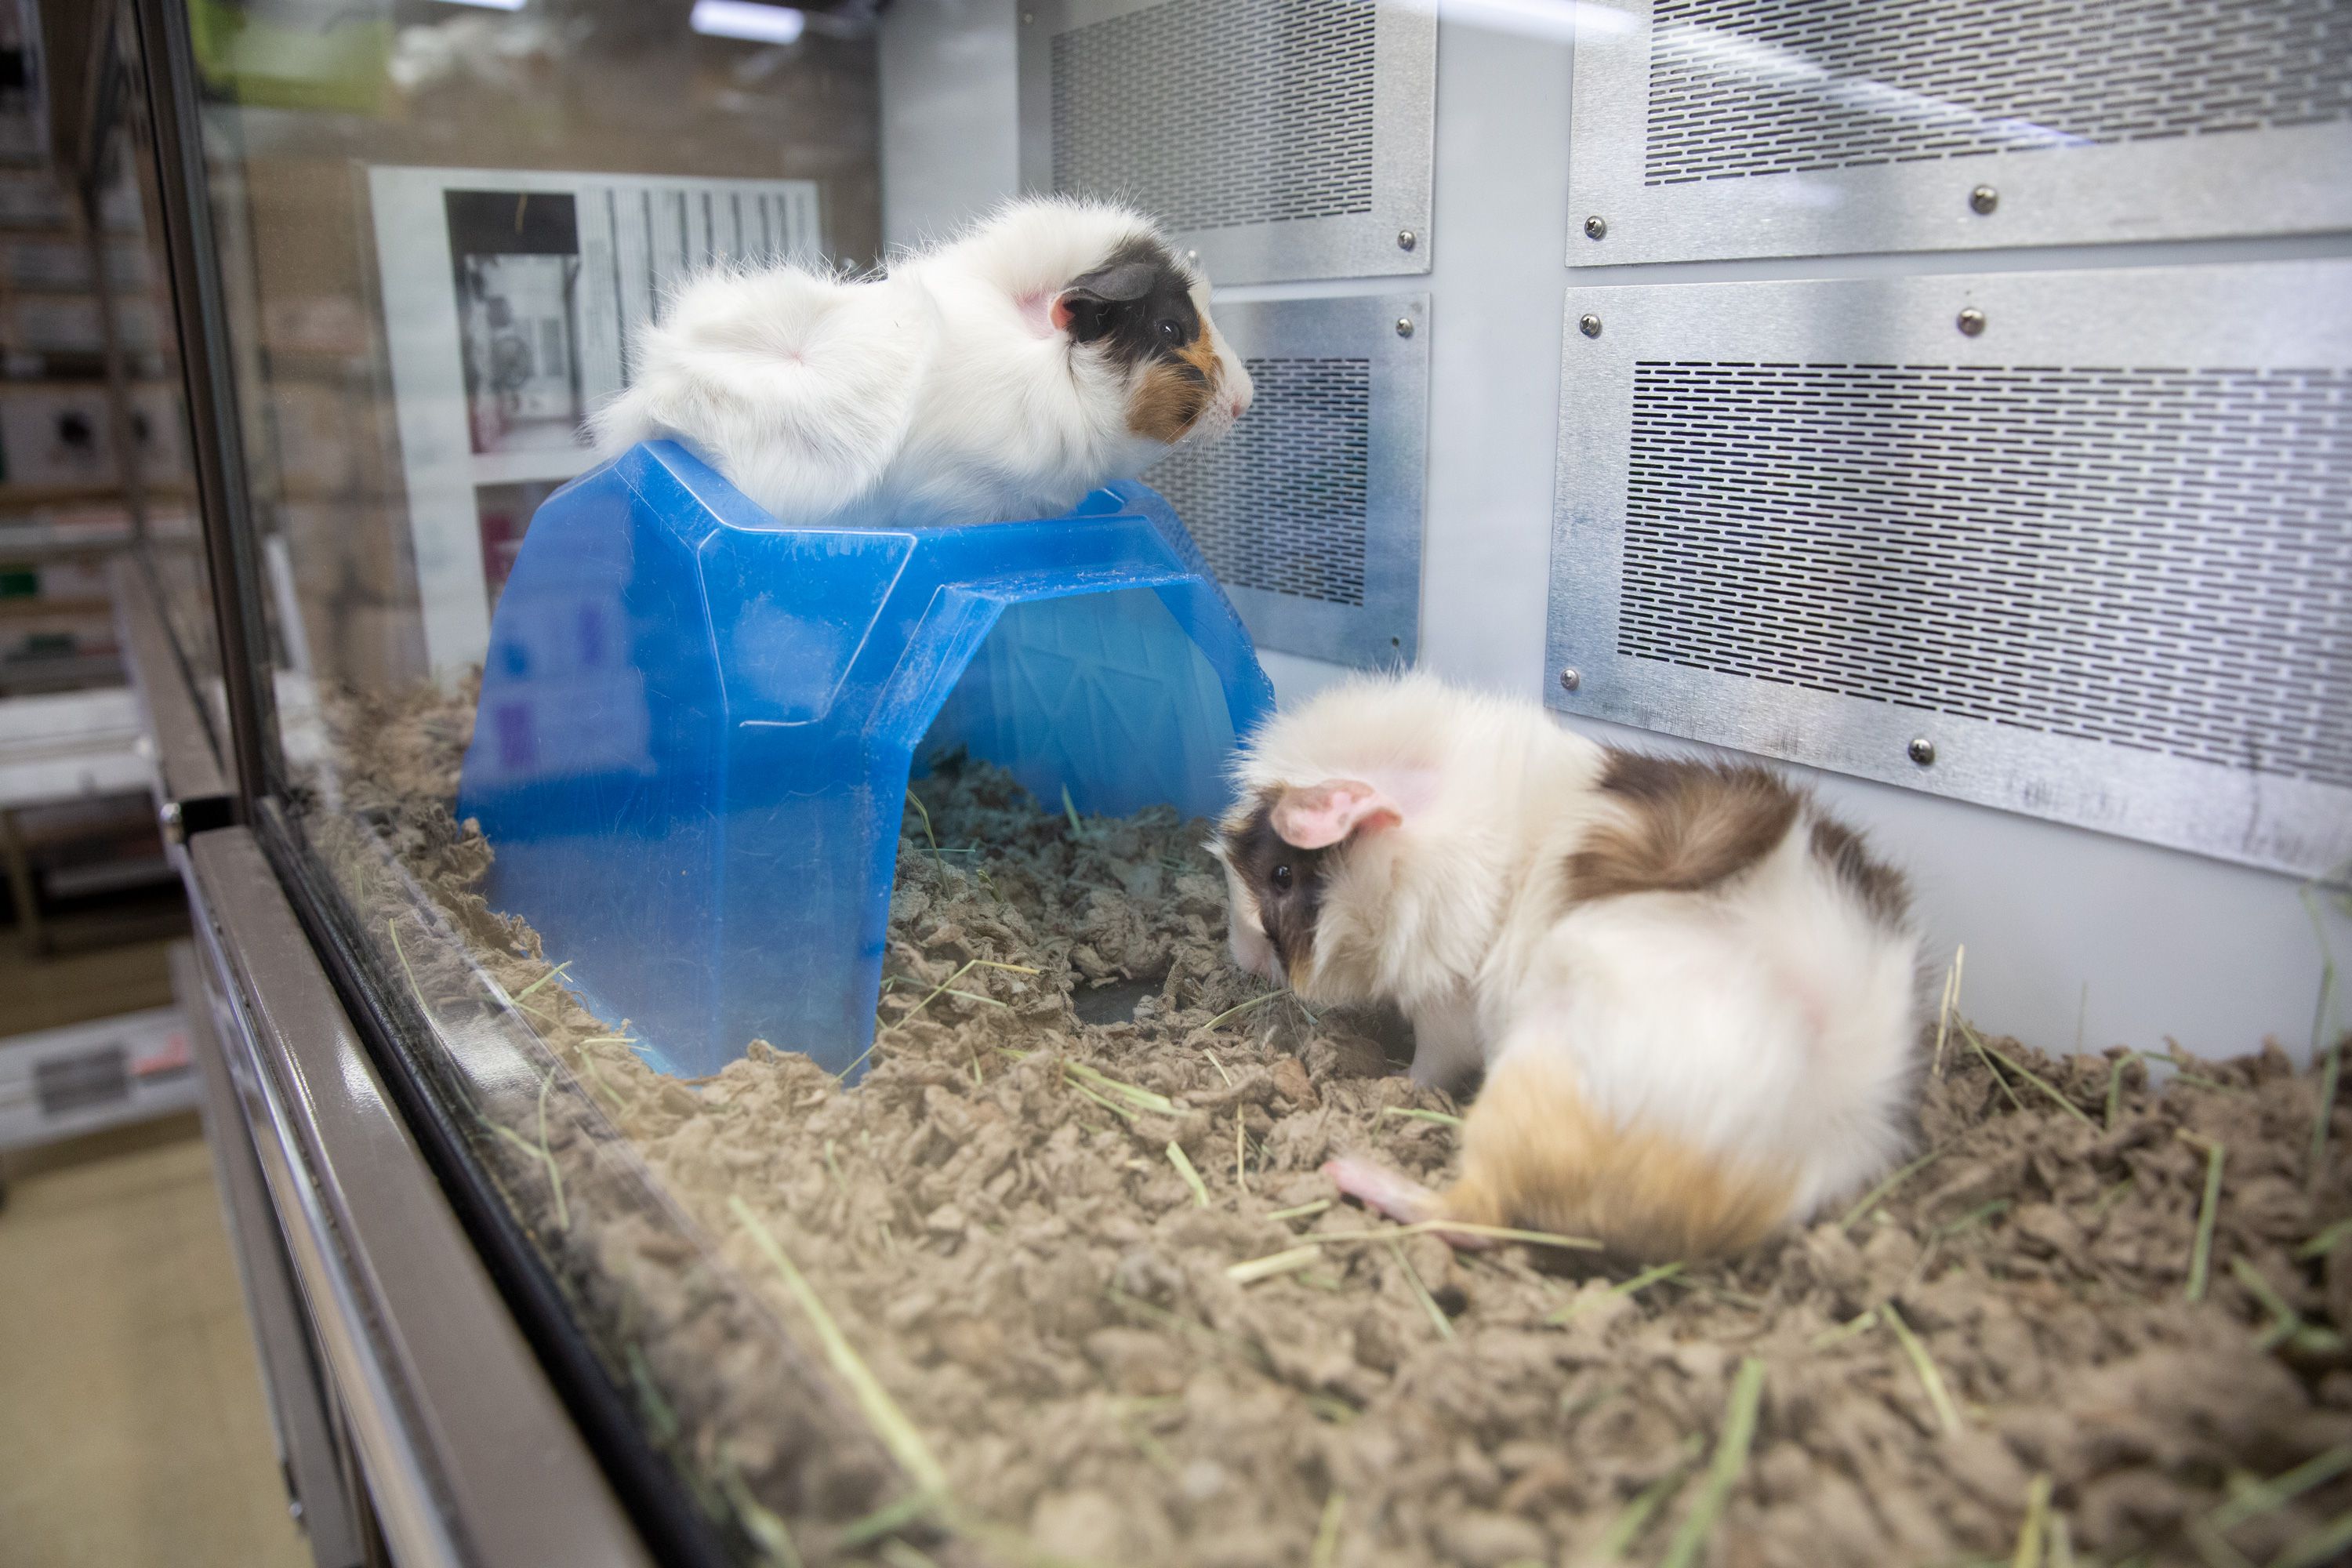 Two Guinea Pigs kept each other company inside a Petco display cage.